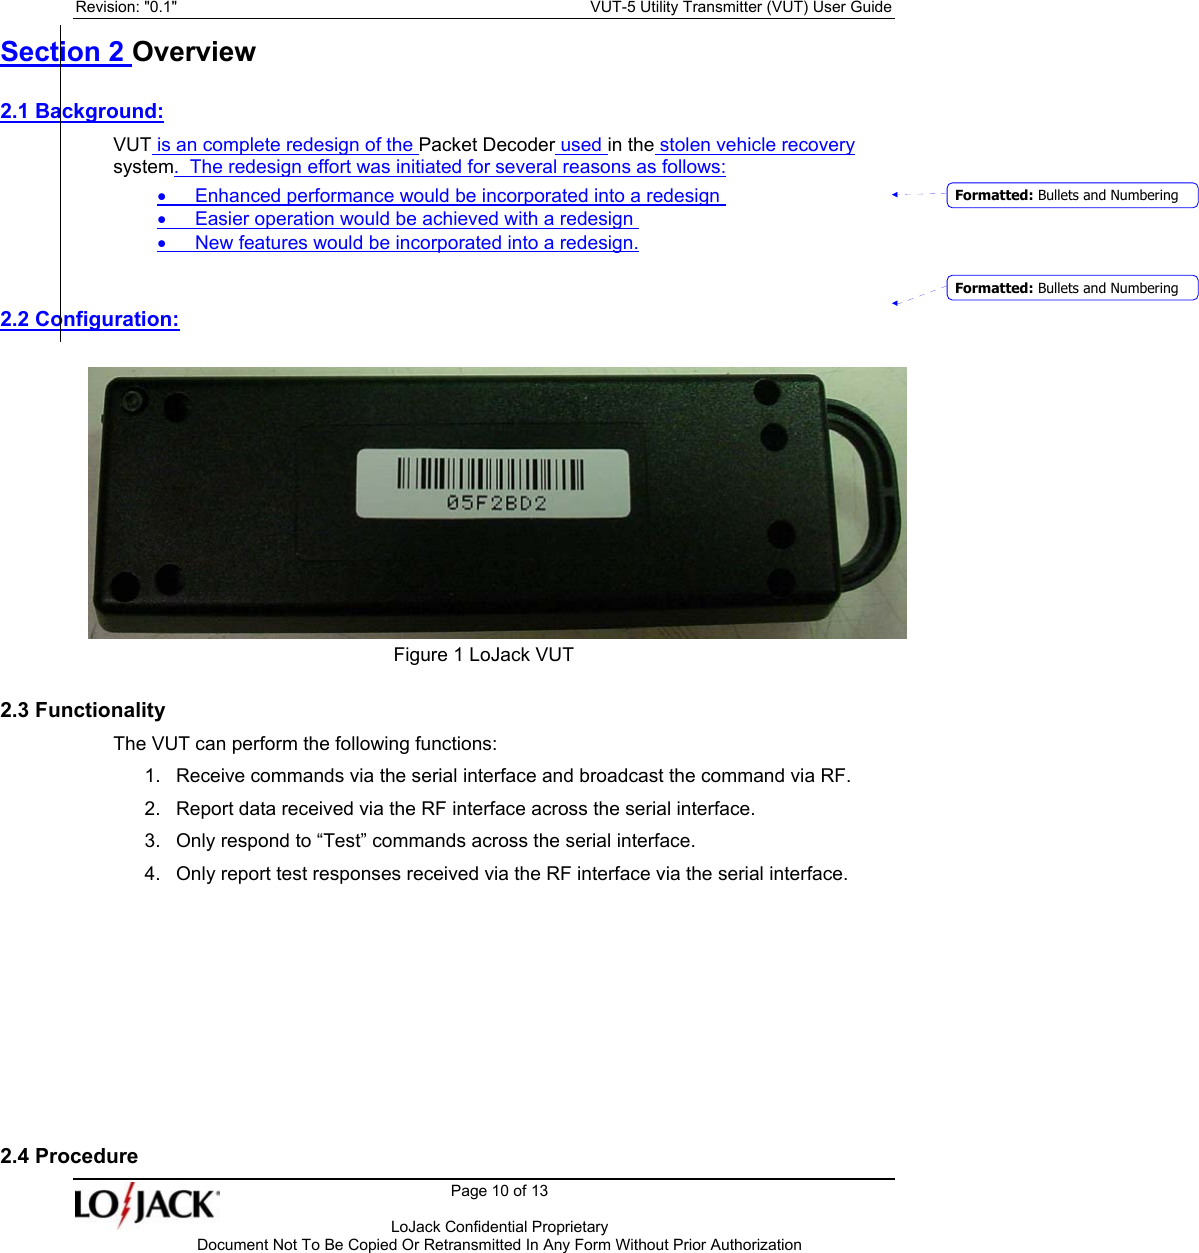 Revision: &quot;0.1&quot;    VUT-5 Utility Transmitter (VUT) User Guide   Page 10 of 13      LoJack Confidential Proprietary  Document Not To Be Copied Or Retransmitted In Any Form Without Prior Authorization Section 2 Overview 2.1 Background: VUT is an complete redesign of the Packet Decoder used in the stolen vehicle recovery system.  The redesign effort was initiated for several reasons as follows: •  Enhanced performance would be incorporated into a redesign  •  Easier operation would be achieved with a redesign  •  New features would be incorporated into a redesign.  2.2 Configuration:          Figure 1 LoJack VUT 2.3 Functionality The VUT can perform the following functions: 1.  Receive commands via the serial interface and broadcast the command via RF. 2.  Report data received via the RF interface across the serial interface. 3.  Only respond to “Test” commands across the serial interface. 4.  Only report test responses received via the RF interface via the serial interface.        2.4 Procedure Formatted: Bullets and NumberingFormatted: Bullets and Numbering